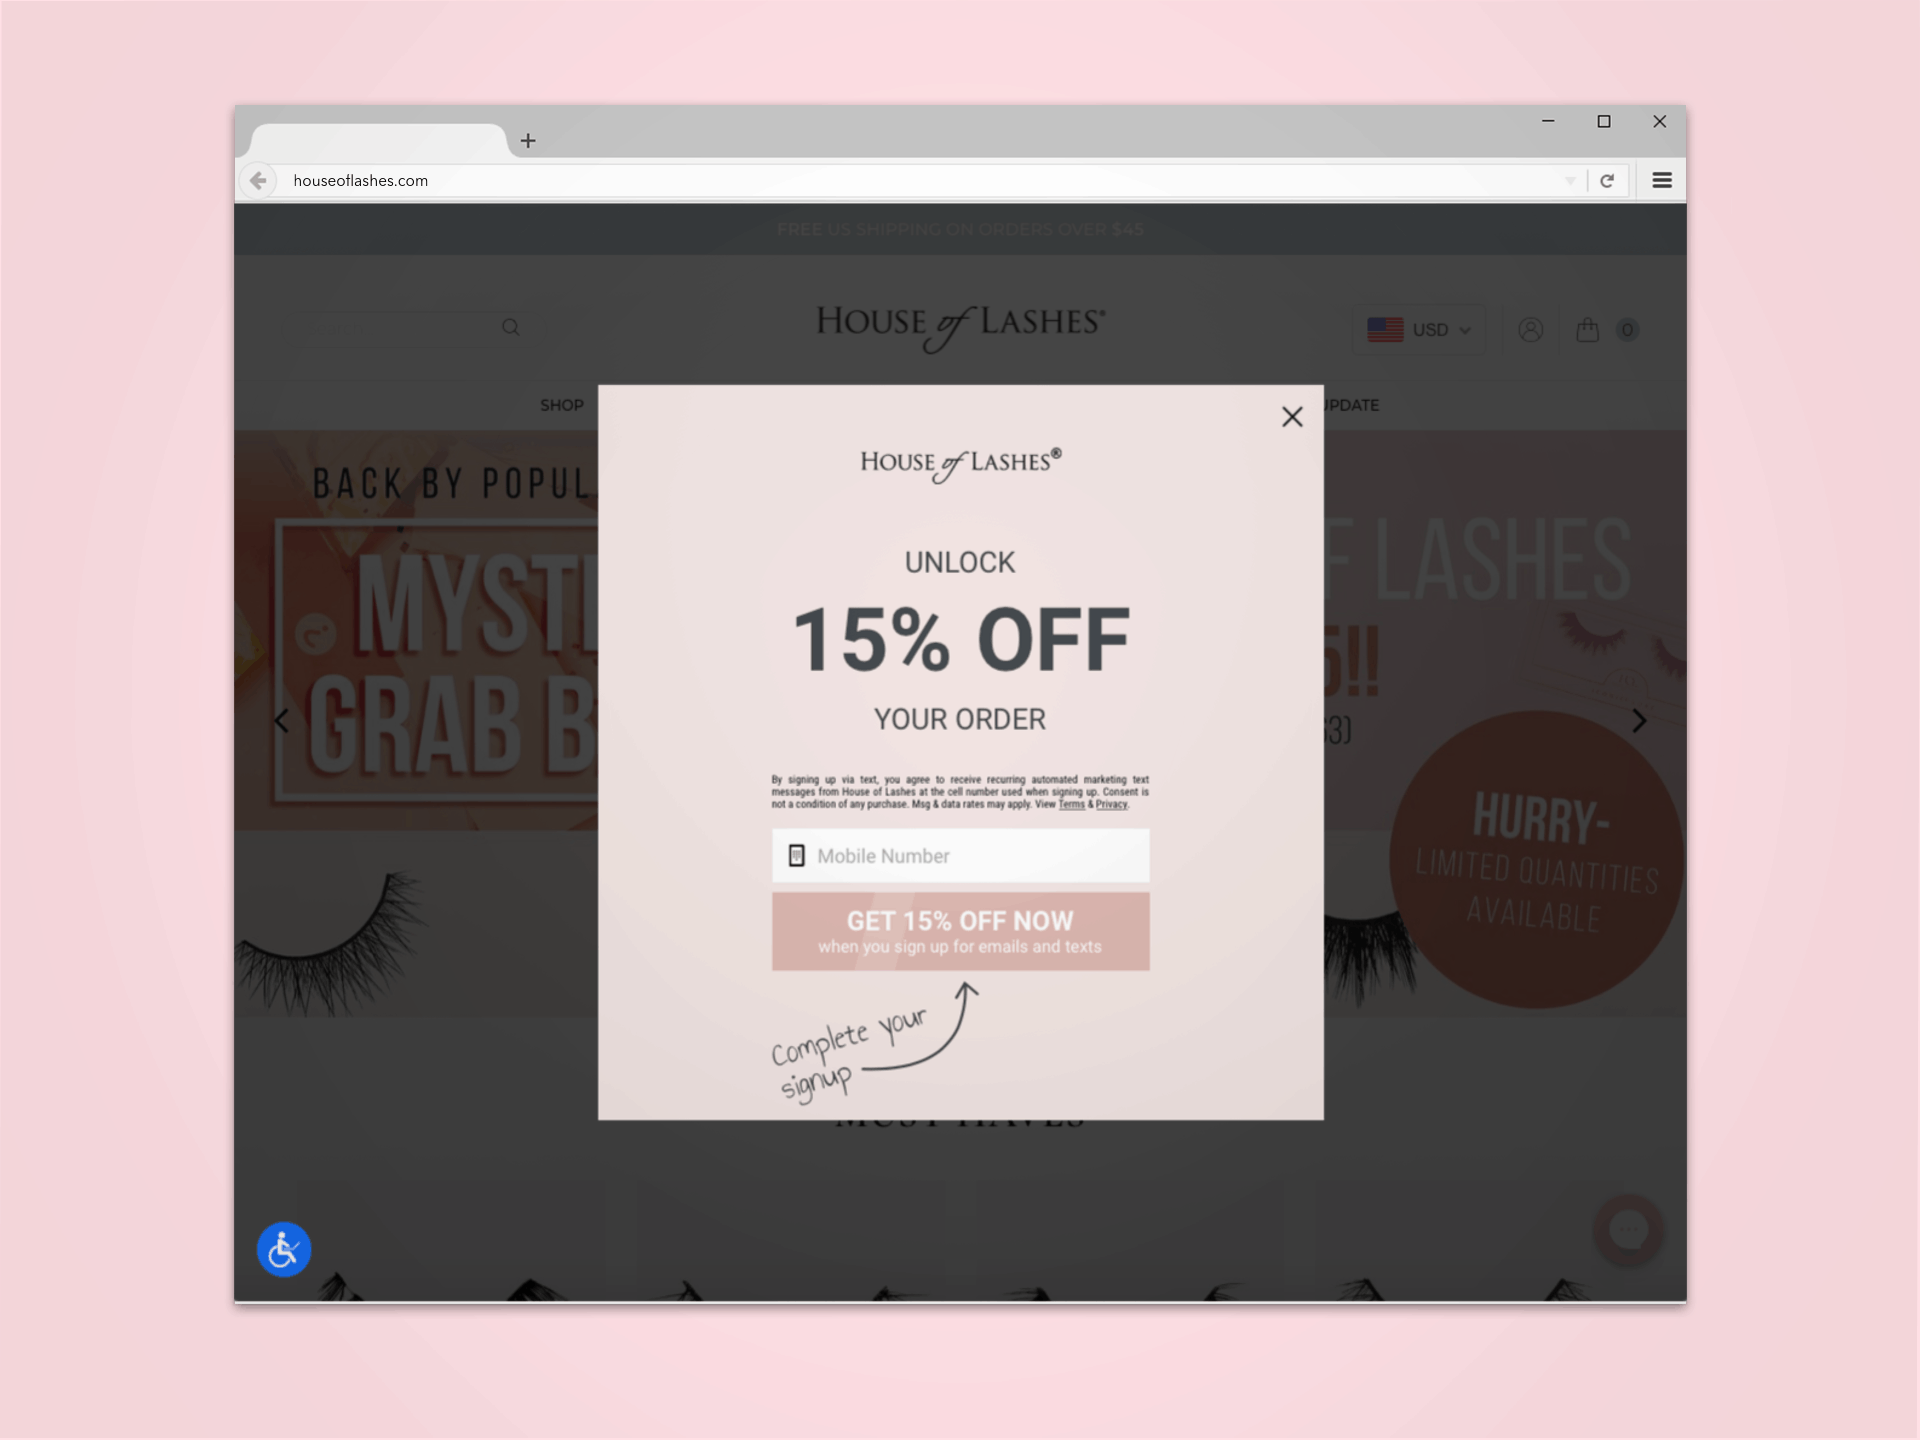 sms marketing pop-up example from house of lashes